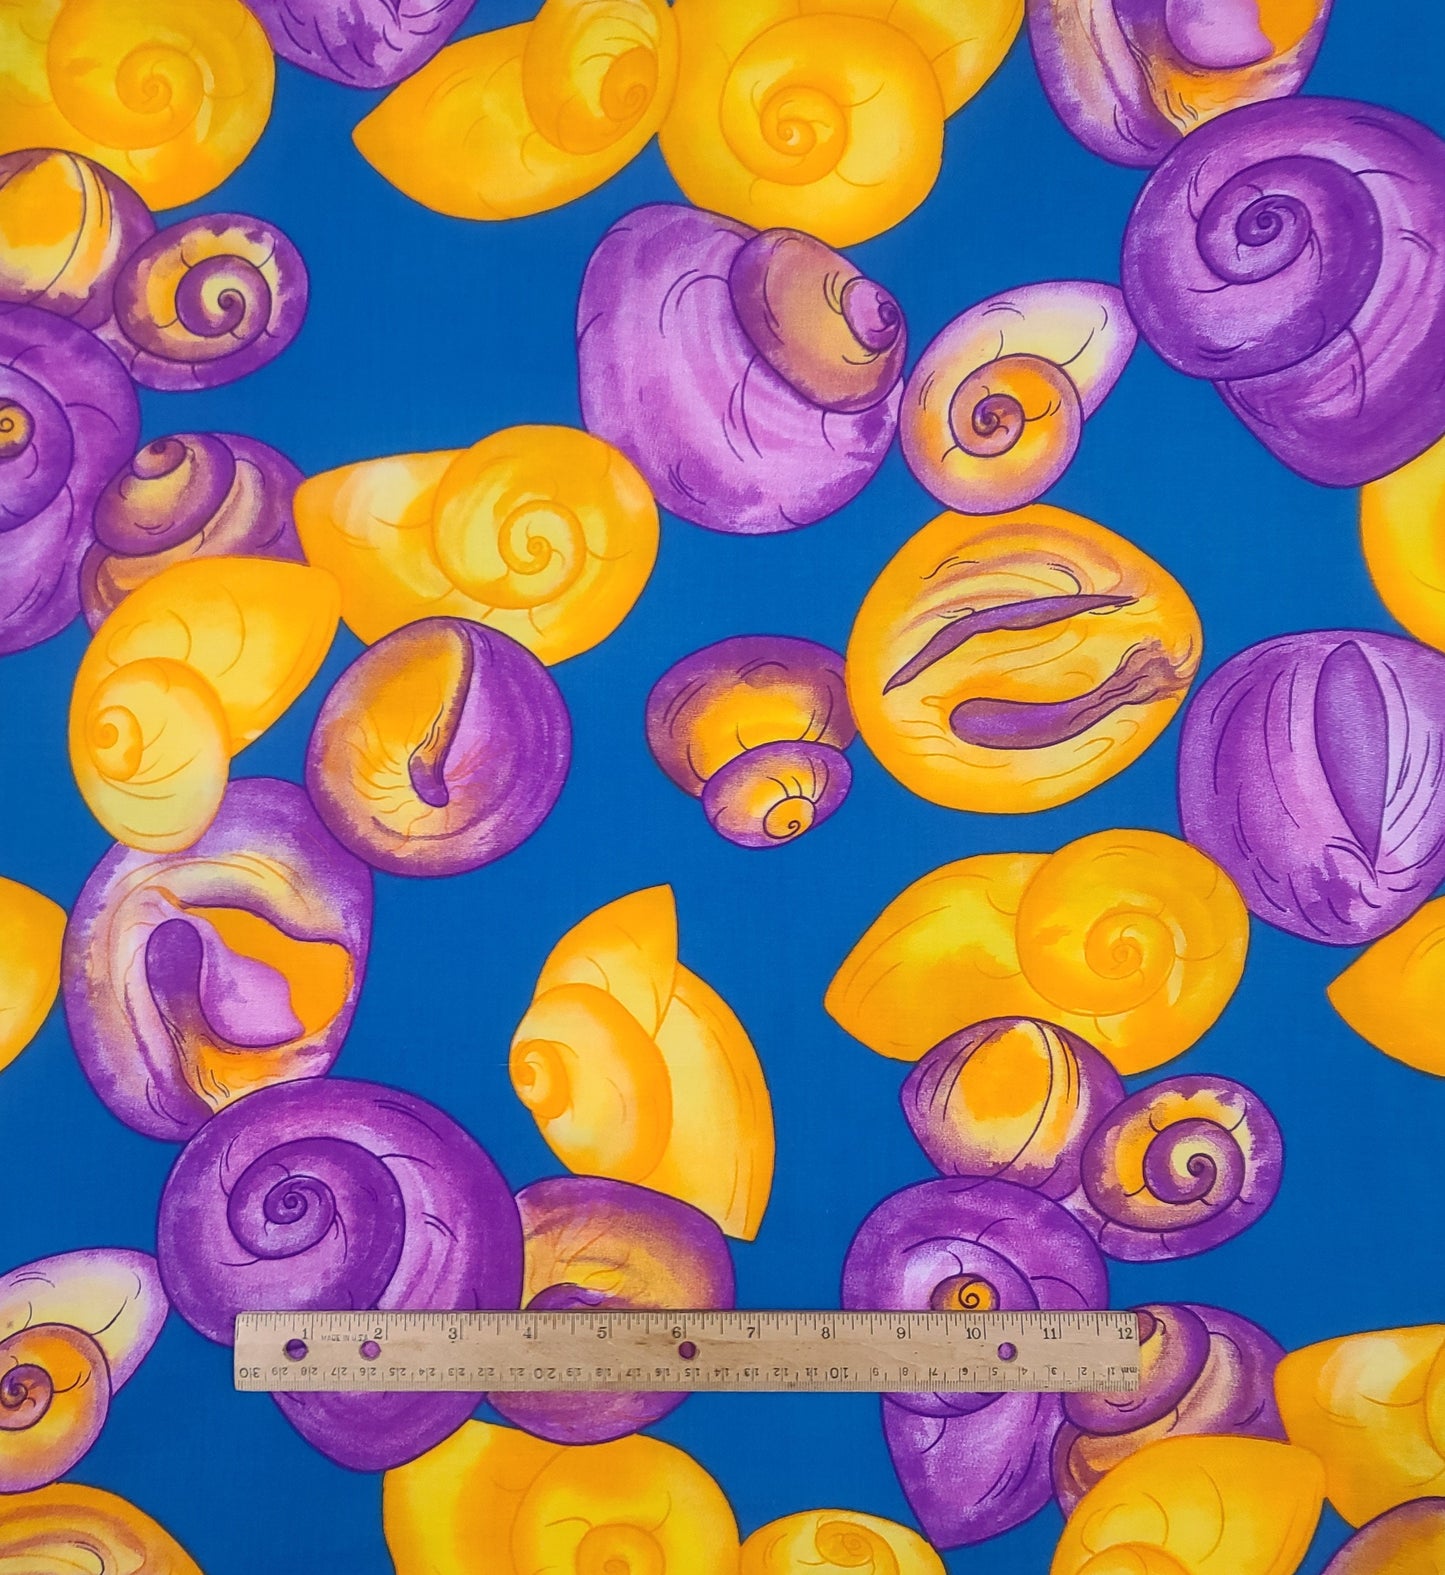 Bright Blue Fabric / Yellow, Gold, Bright Purple and Lavender Snail Shell Print - Selvage to Selvage Print